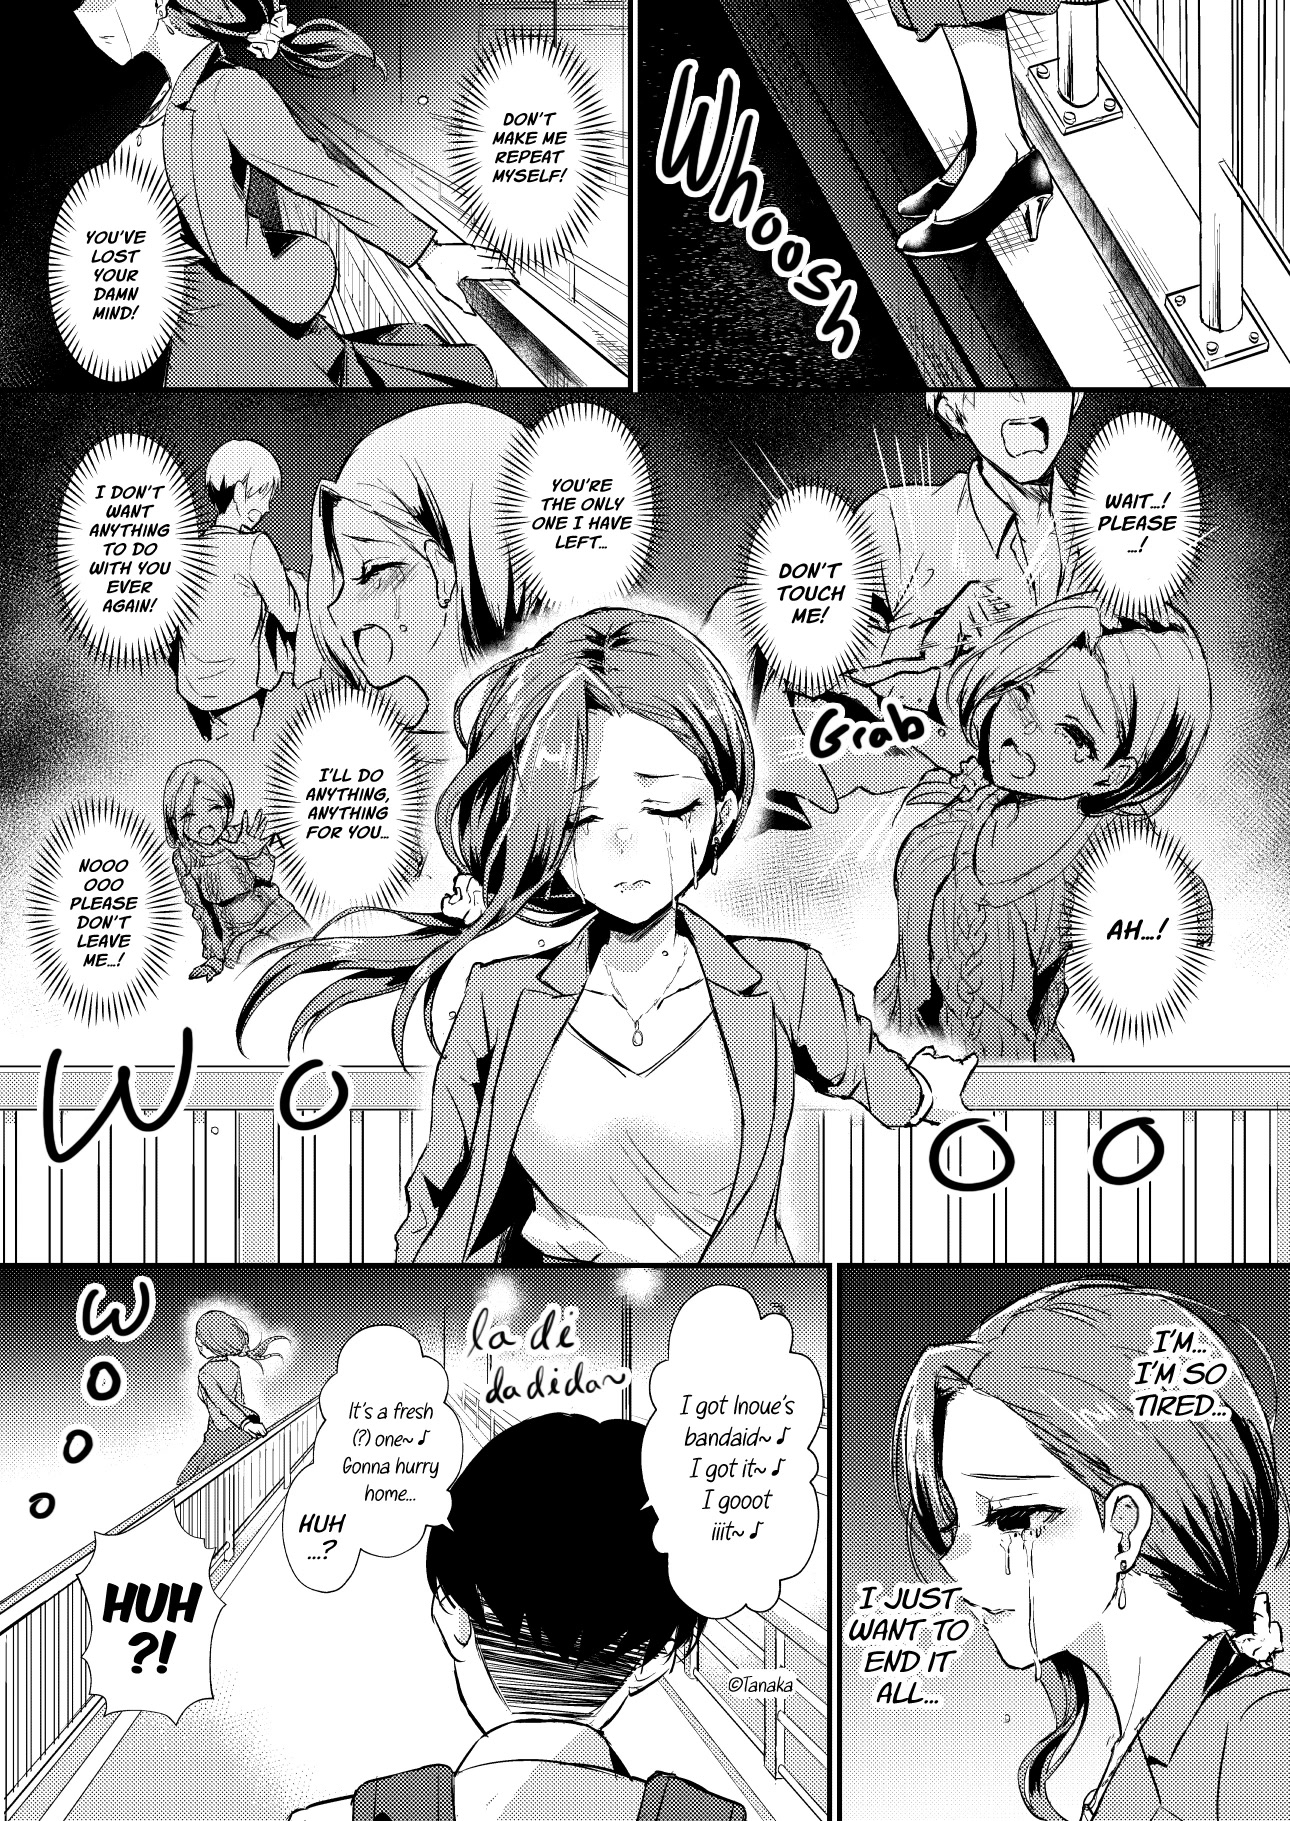 A Story Where All The Characters Are Super Yandere - Page 1